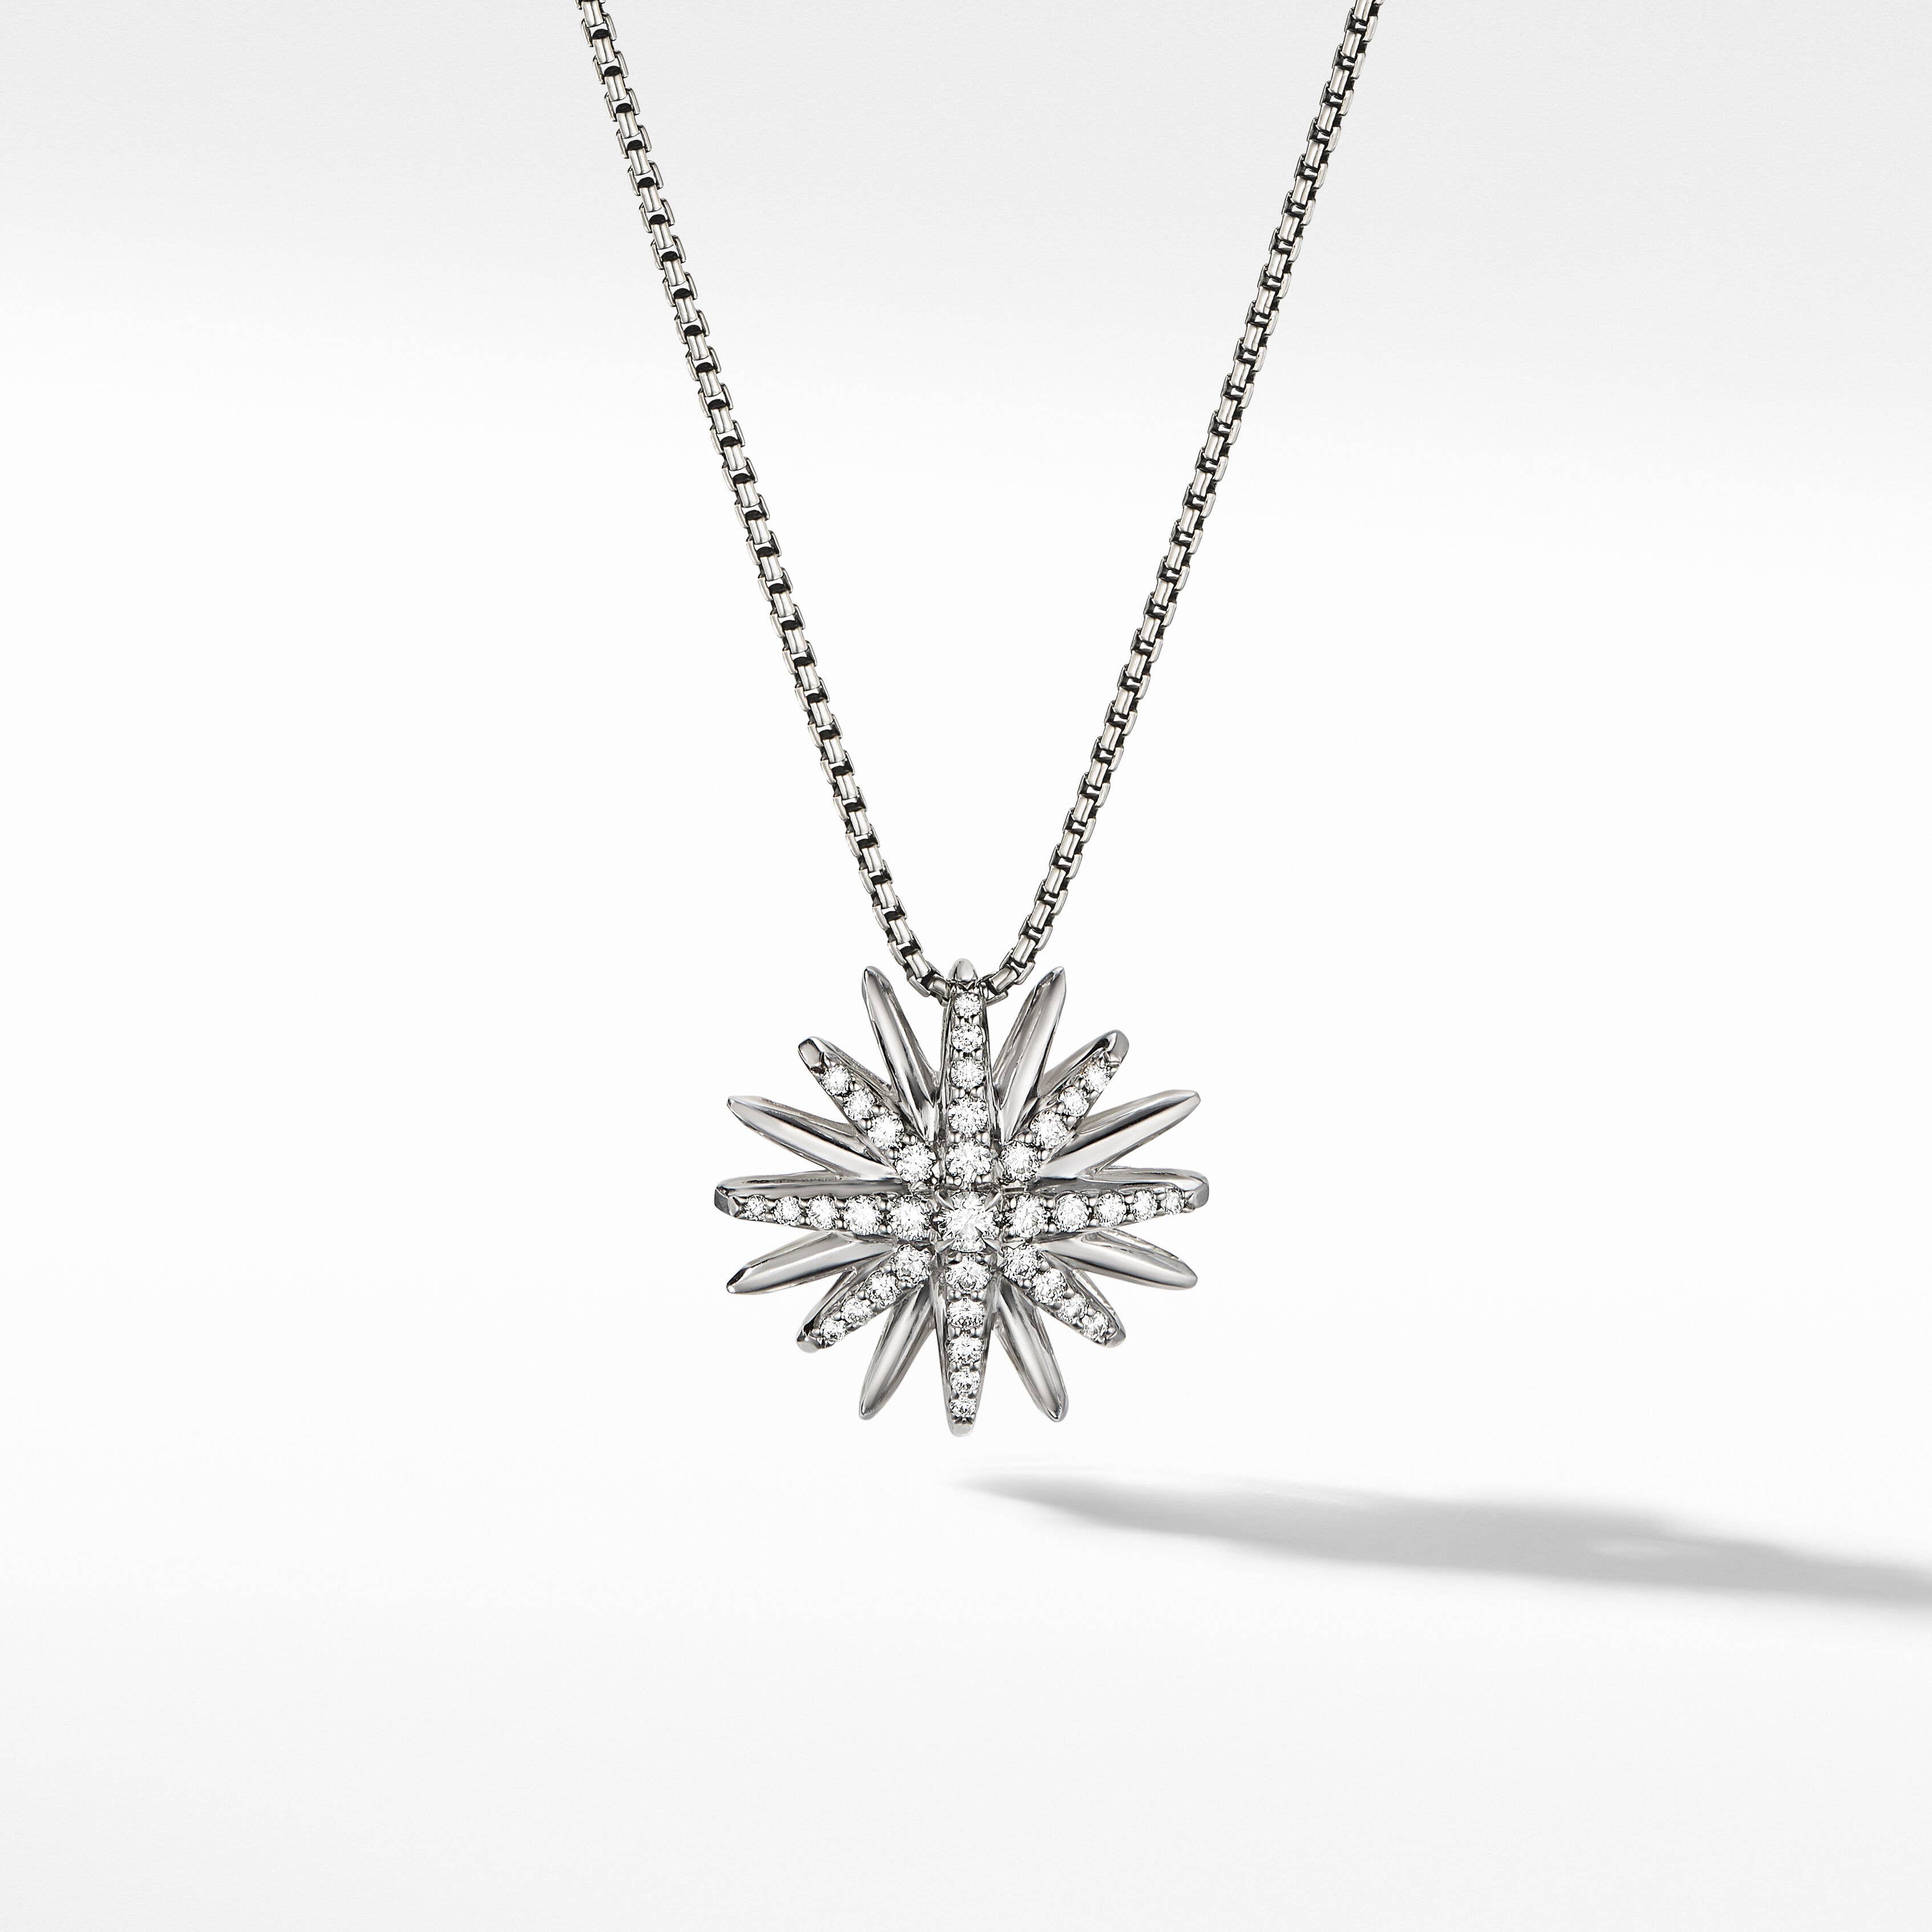 Starburst Pendant Necklace in Sterling Silver with Pavé Diamonds